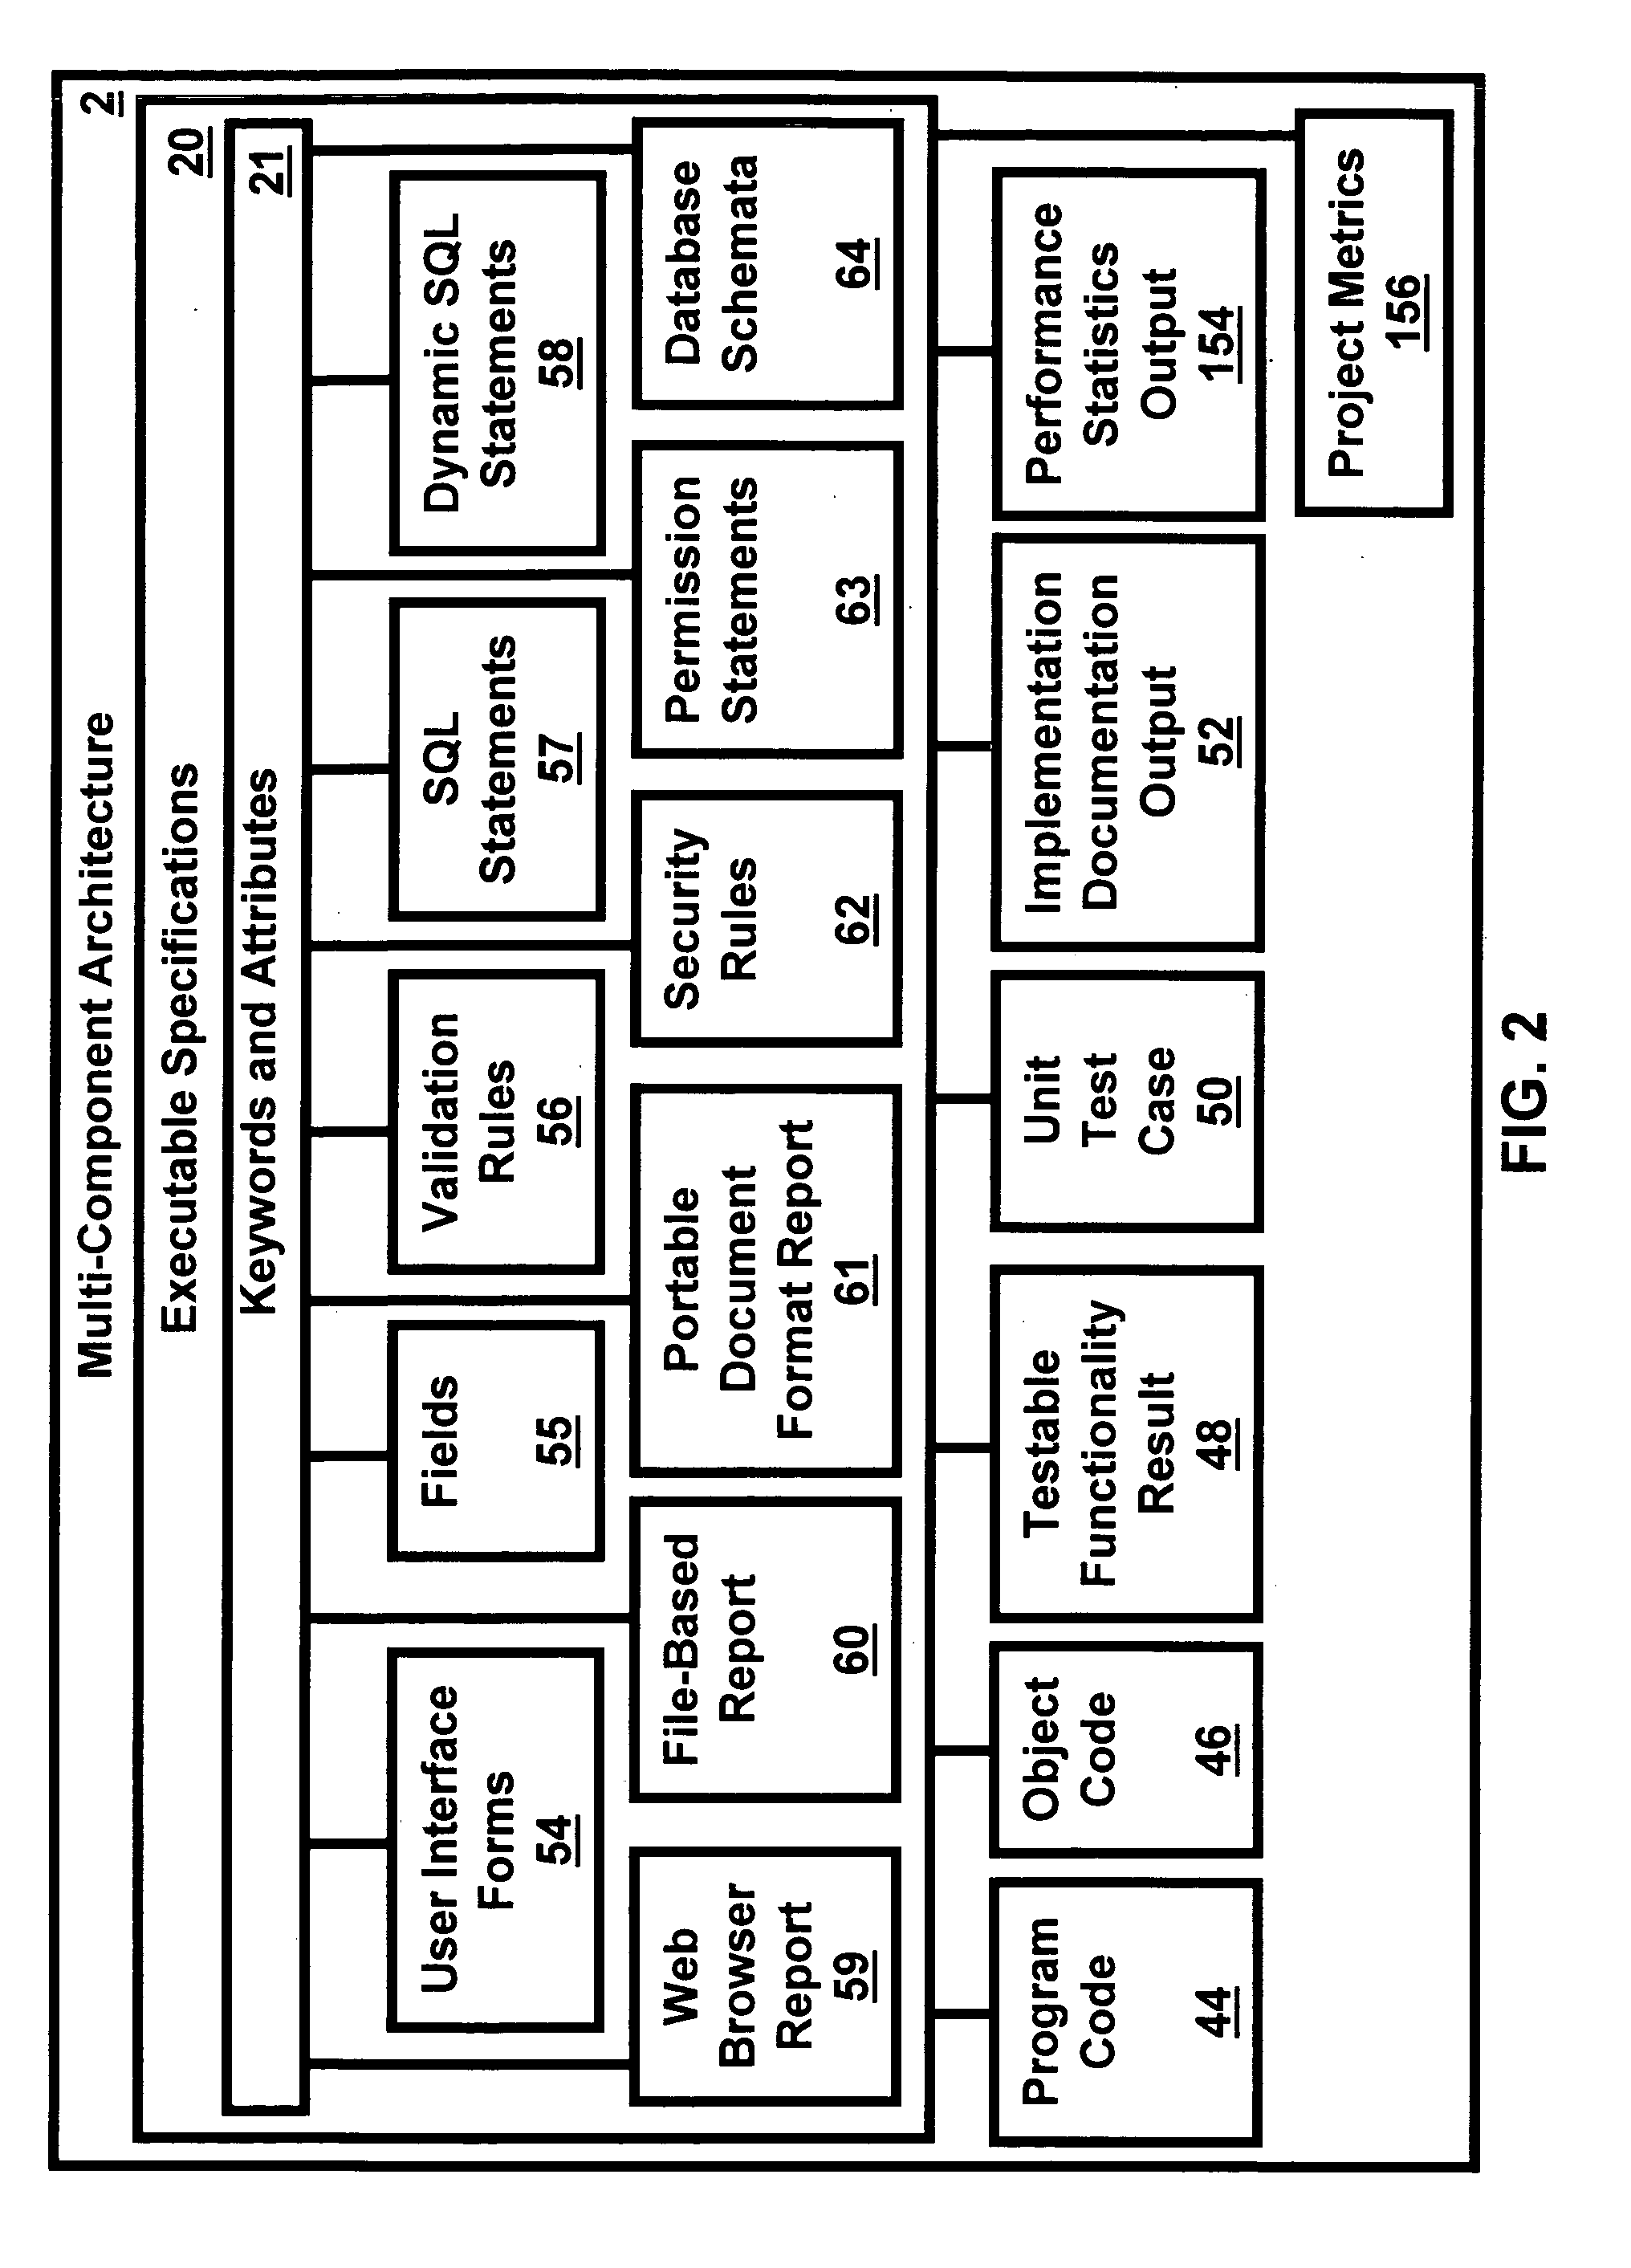 Computer system for performing reusable software application development from a set of declarative executable specifications